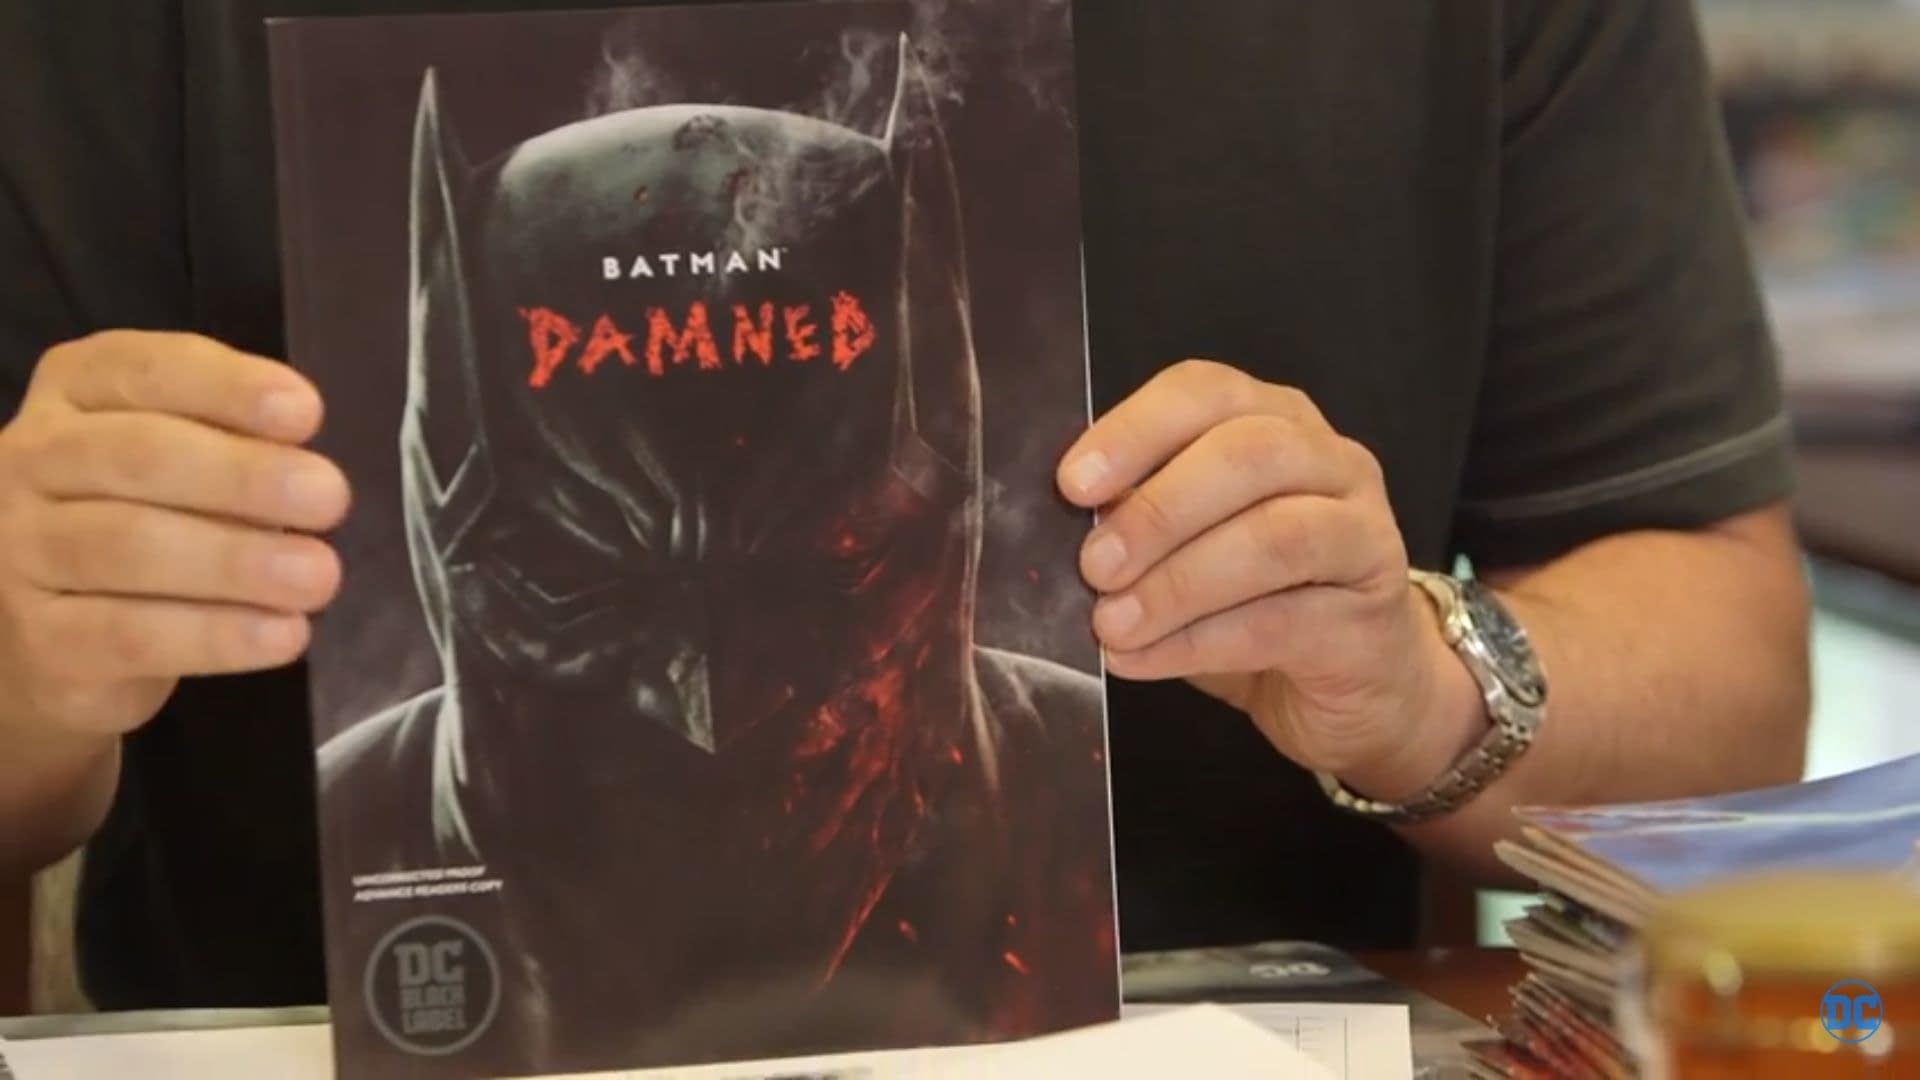 DC Comics' Black Label Series to Be Oversized, Starting with Batman: Damned